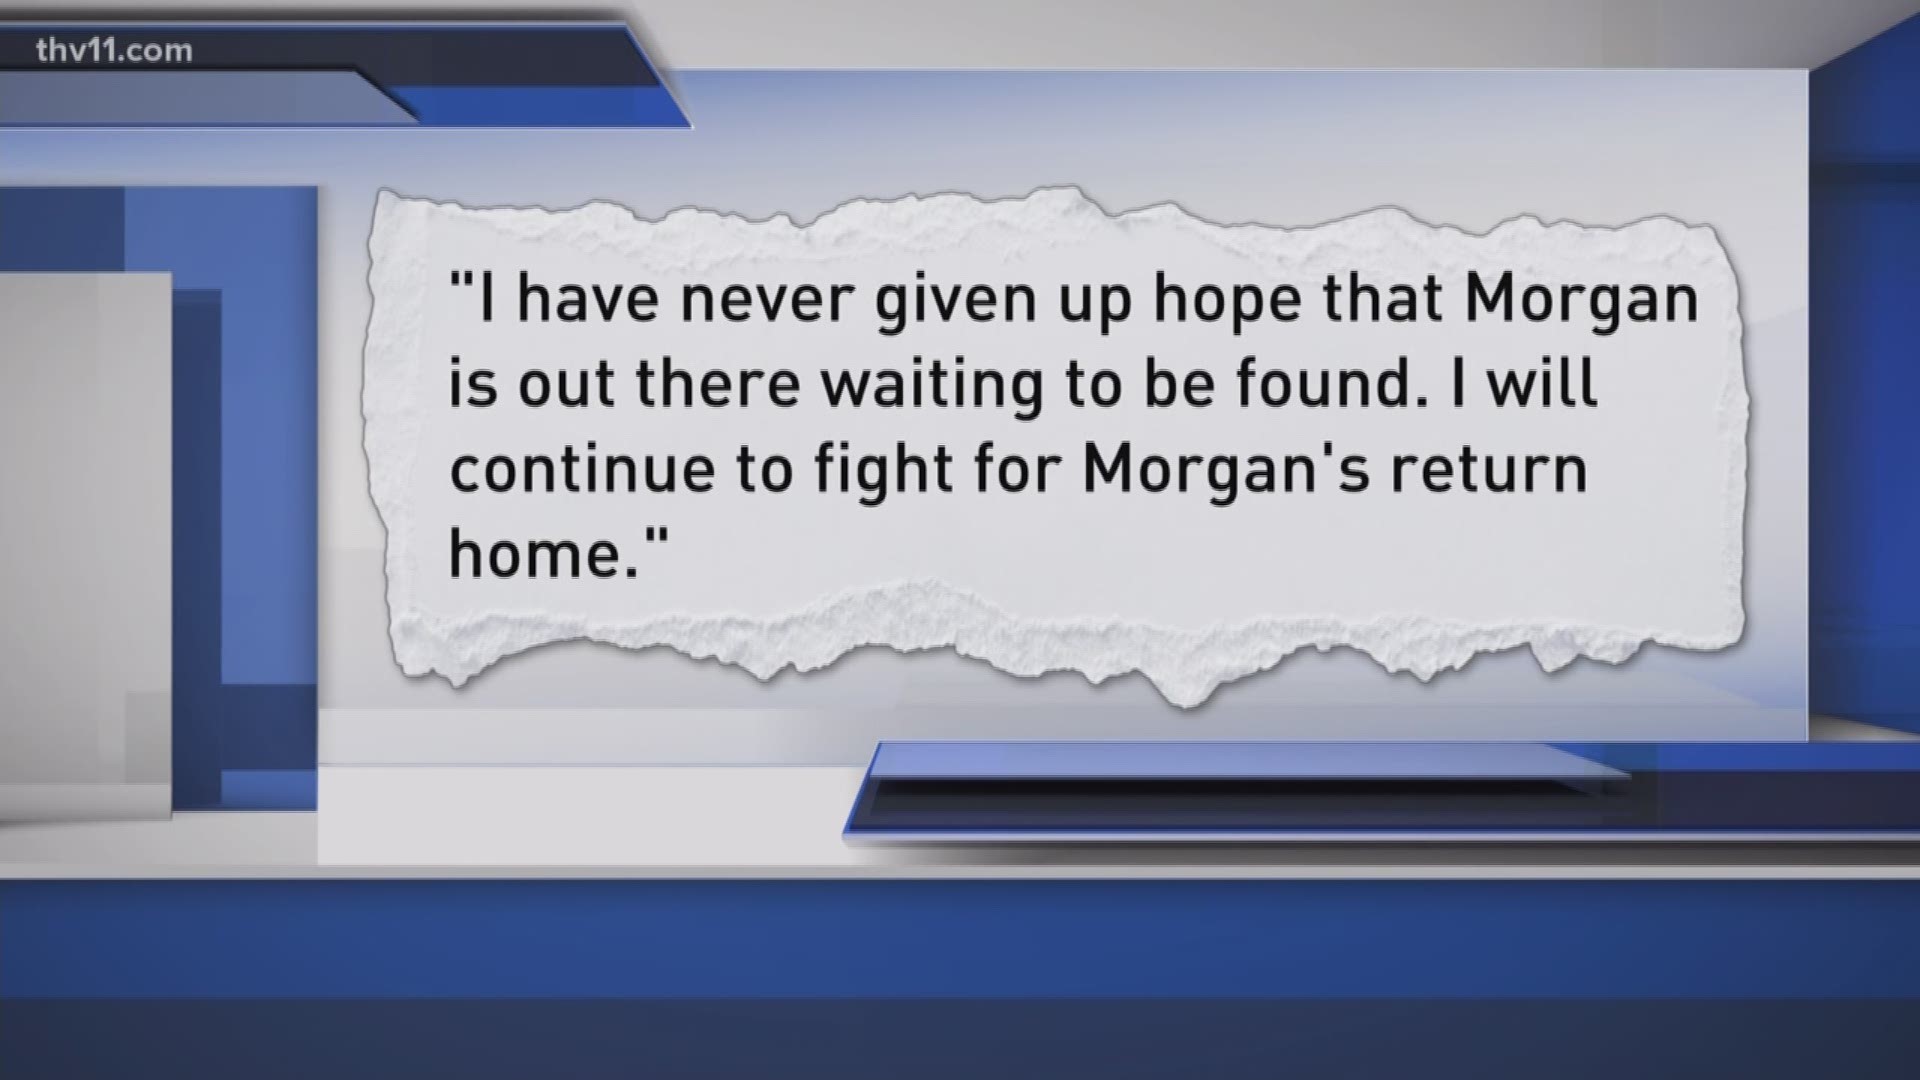 A timeline of the events surrounding Morgan Nick's disappearance to date.